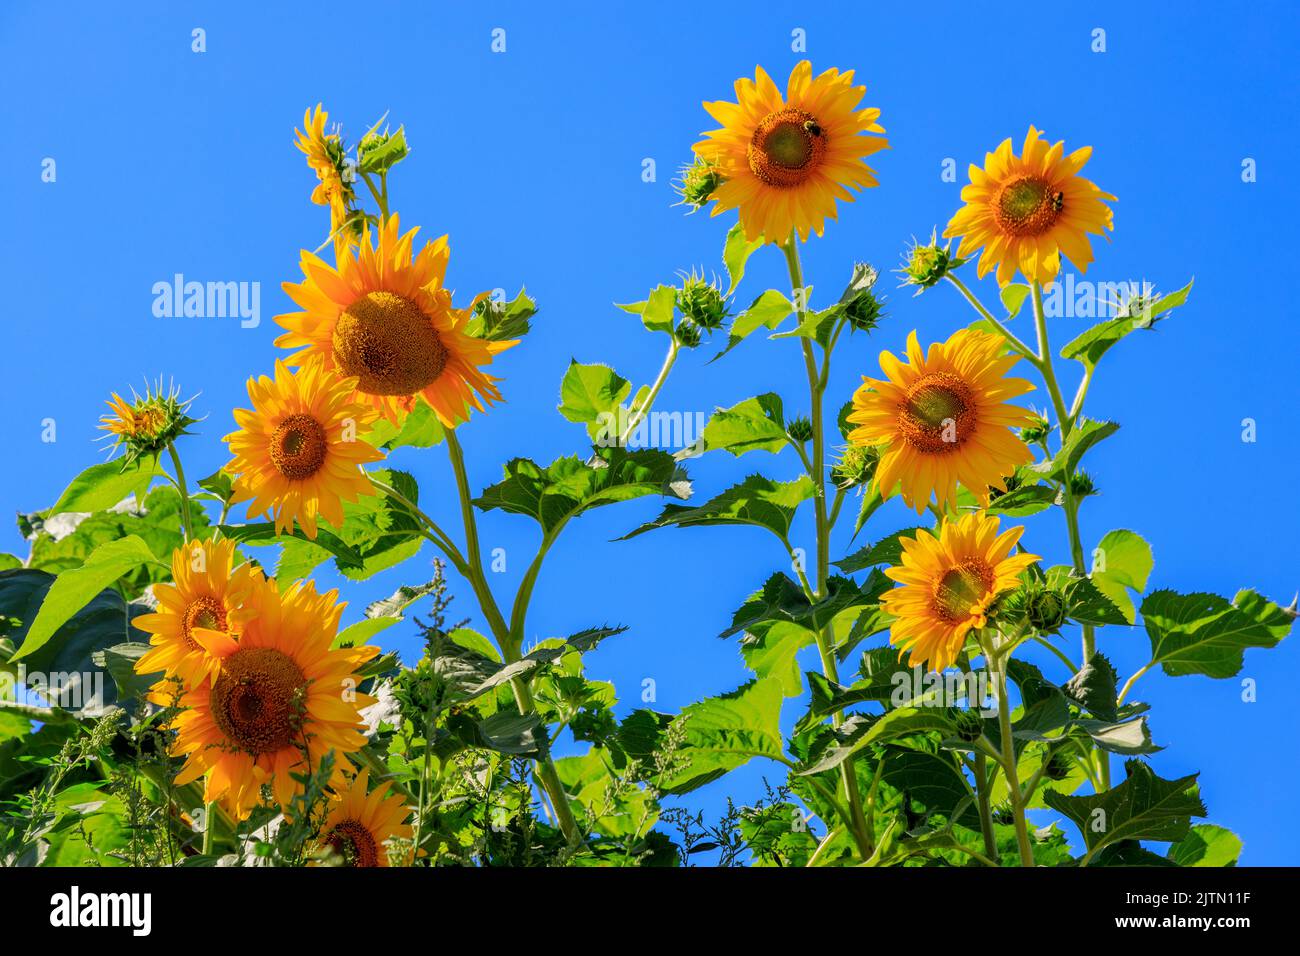 Yellow sunflowers in a b eautiful floral pattern of flowers in a garden flower bed. Stock Photo